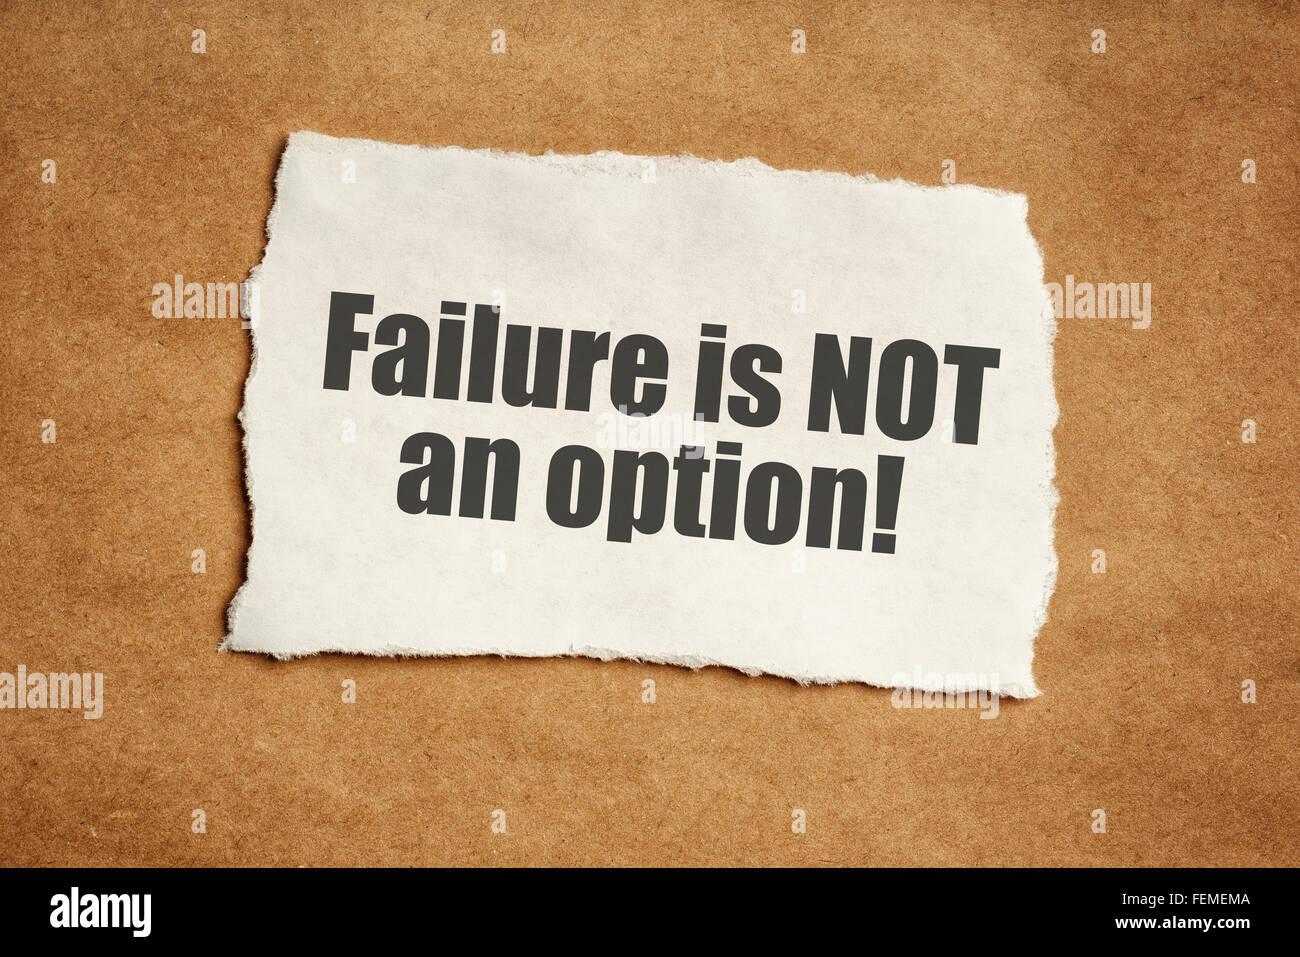 Failure is not an option motivational message on piece of scrap paper Stock Photo